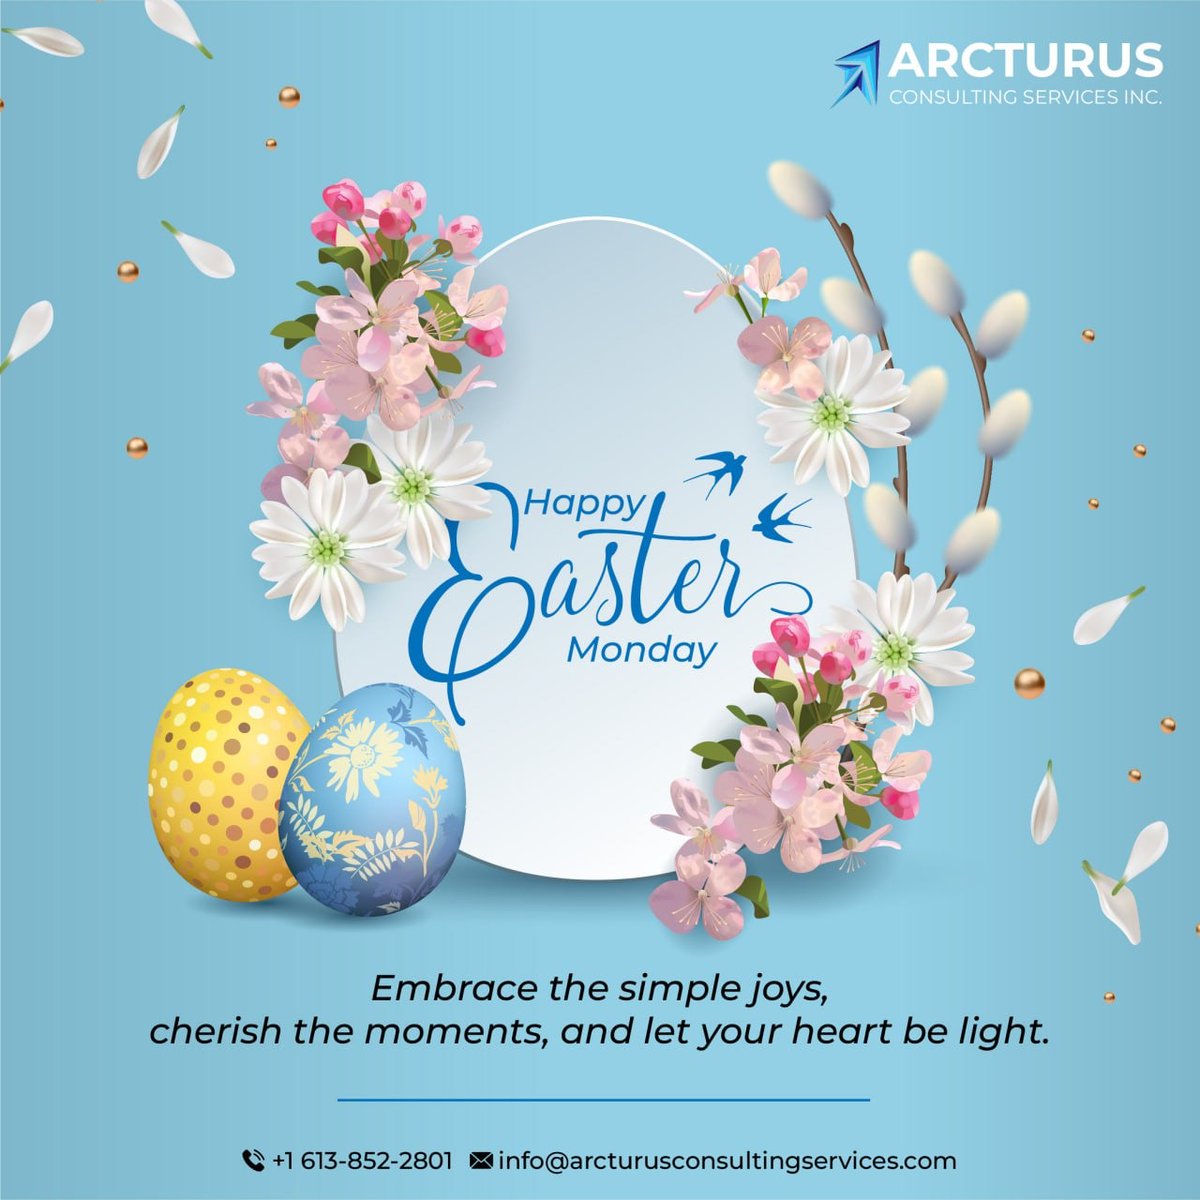 As the echoes of Easter Sunday fade, let's carry its spirit into the new week. Easter Monday, a time for reflection, gratitude, and the promise of beginnings, whether you're unwinding with loved ones. #eastermonday #oracleconsulting #oraclecloudtraining #recruitment #arcturus